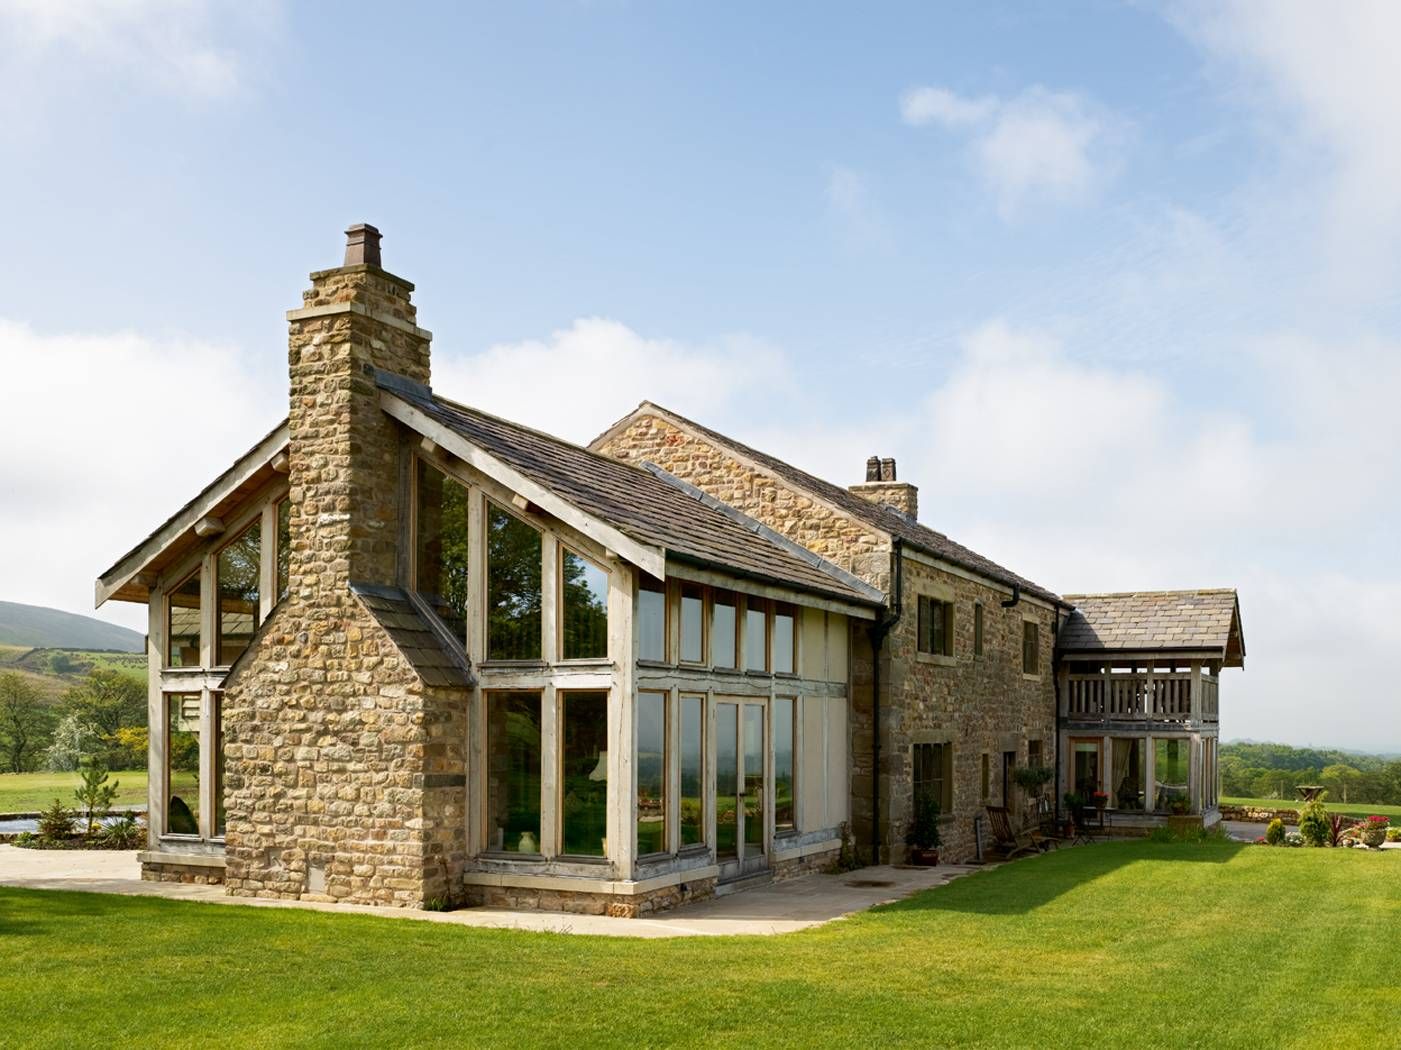 Barn Conversion Ideas – Ways To Transform Old Farm Buildings Into Stunning Homes